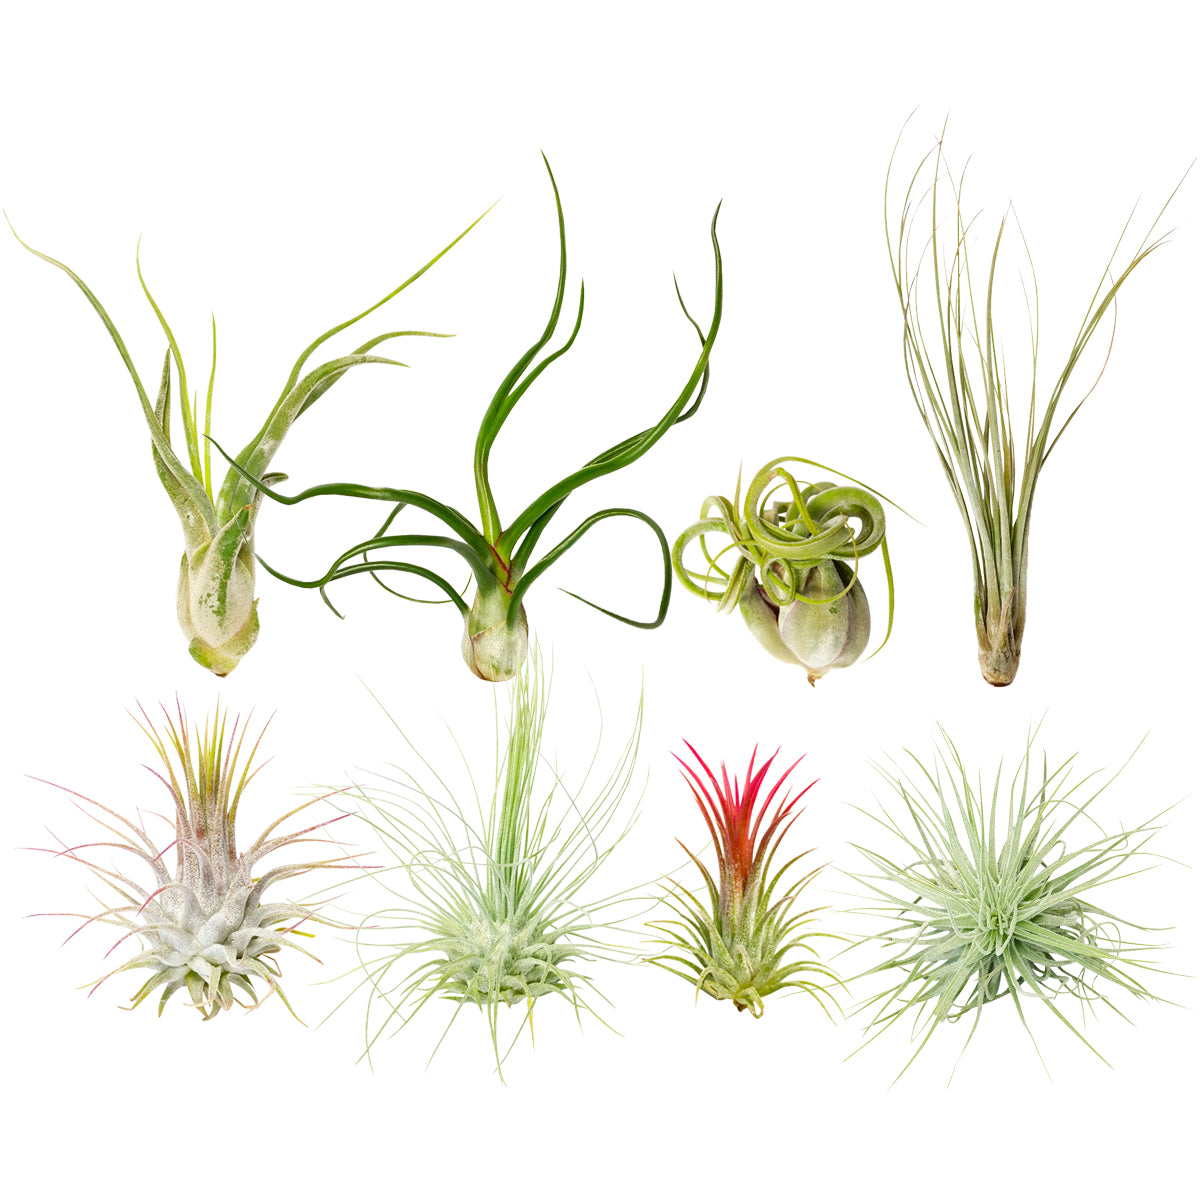 Assorted Collection of Live Air Plants Randomly Picked, Set of Live Air Plants, Air Plants Gift Box, Air Plants Gift Ideas, Air Plants Decoration, Rare Air Plants for Sale